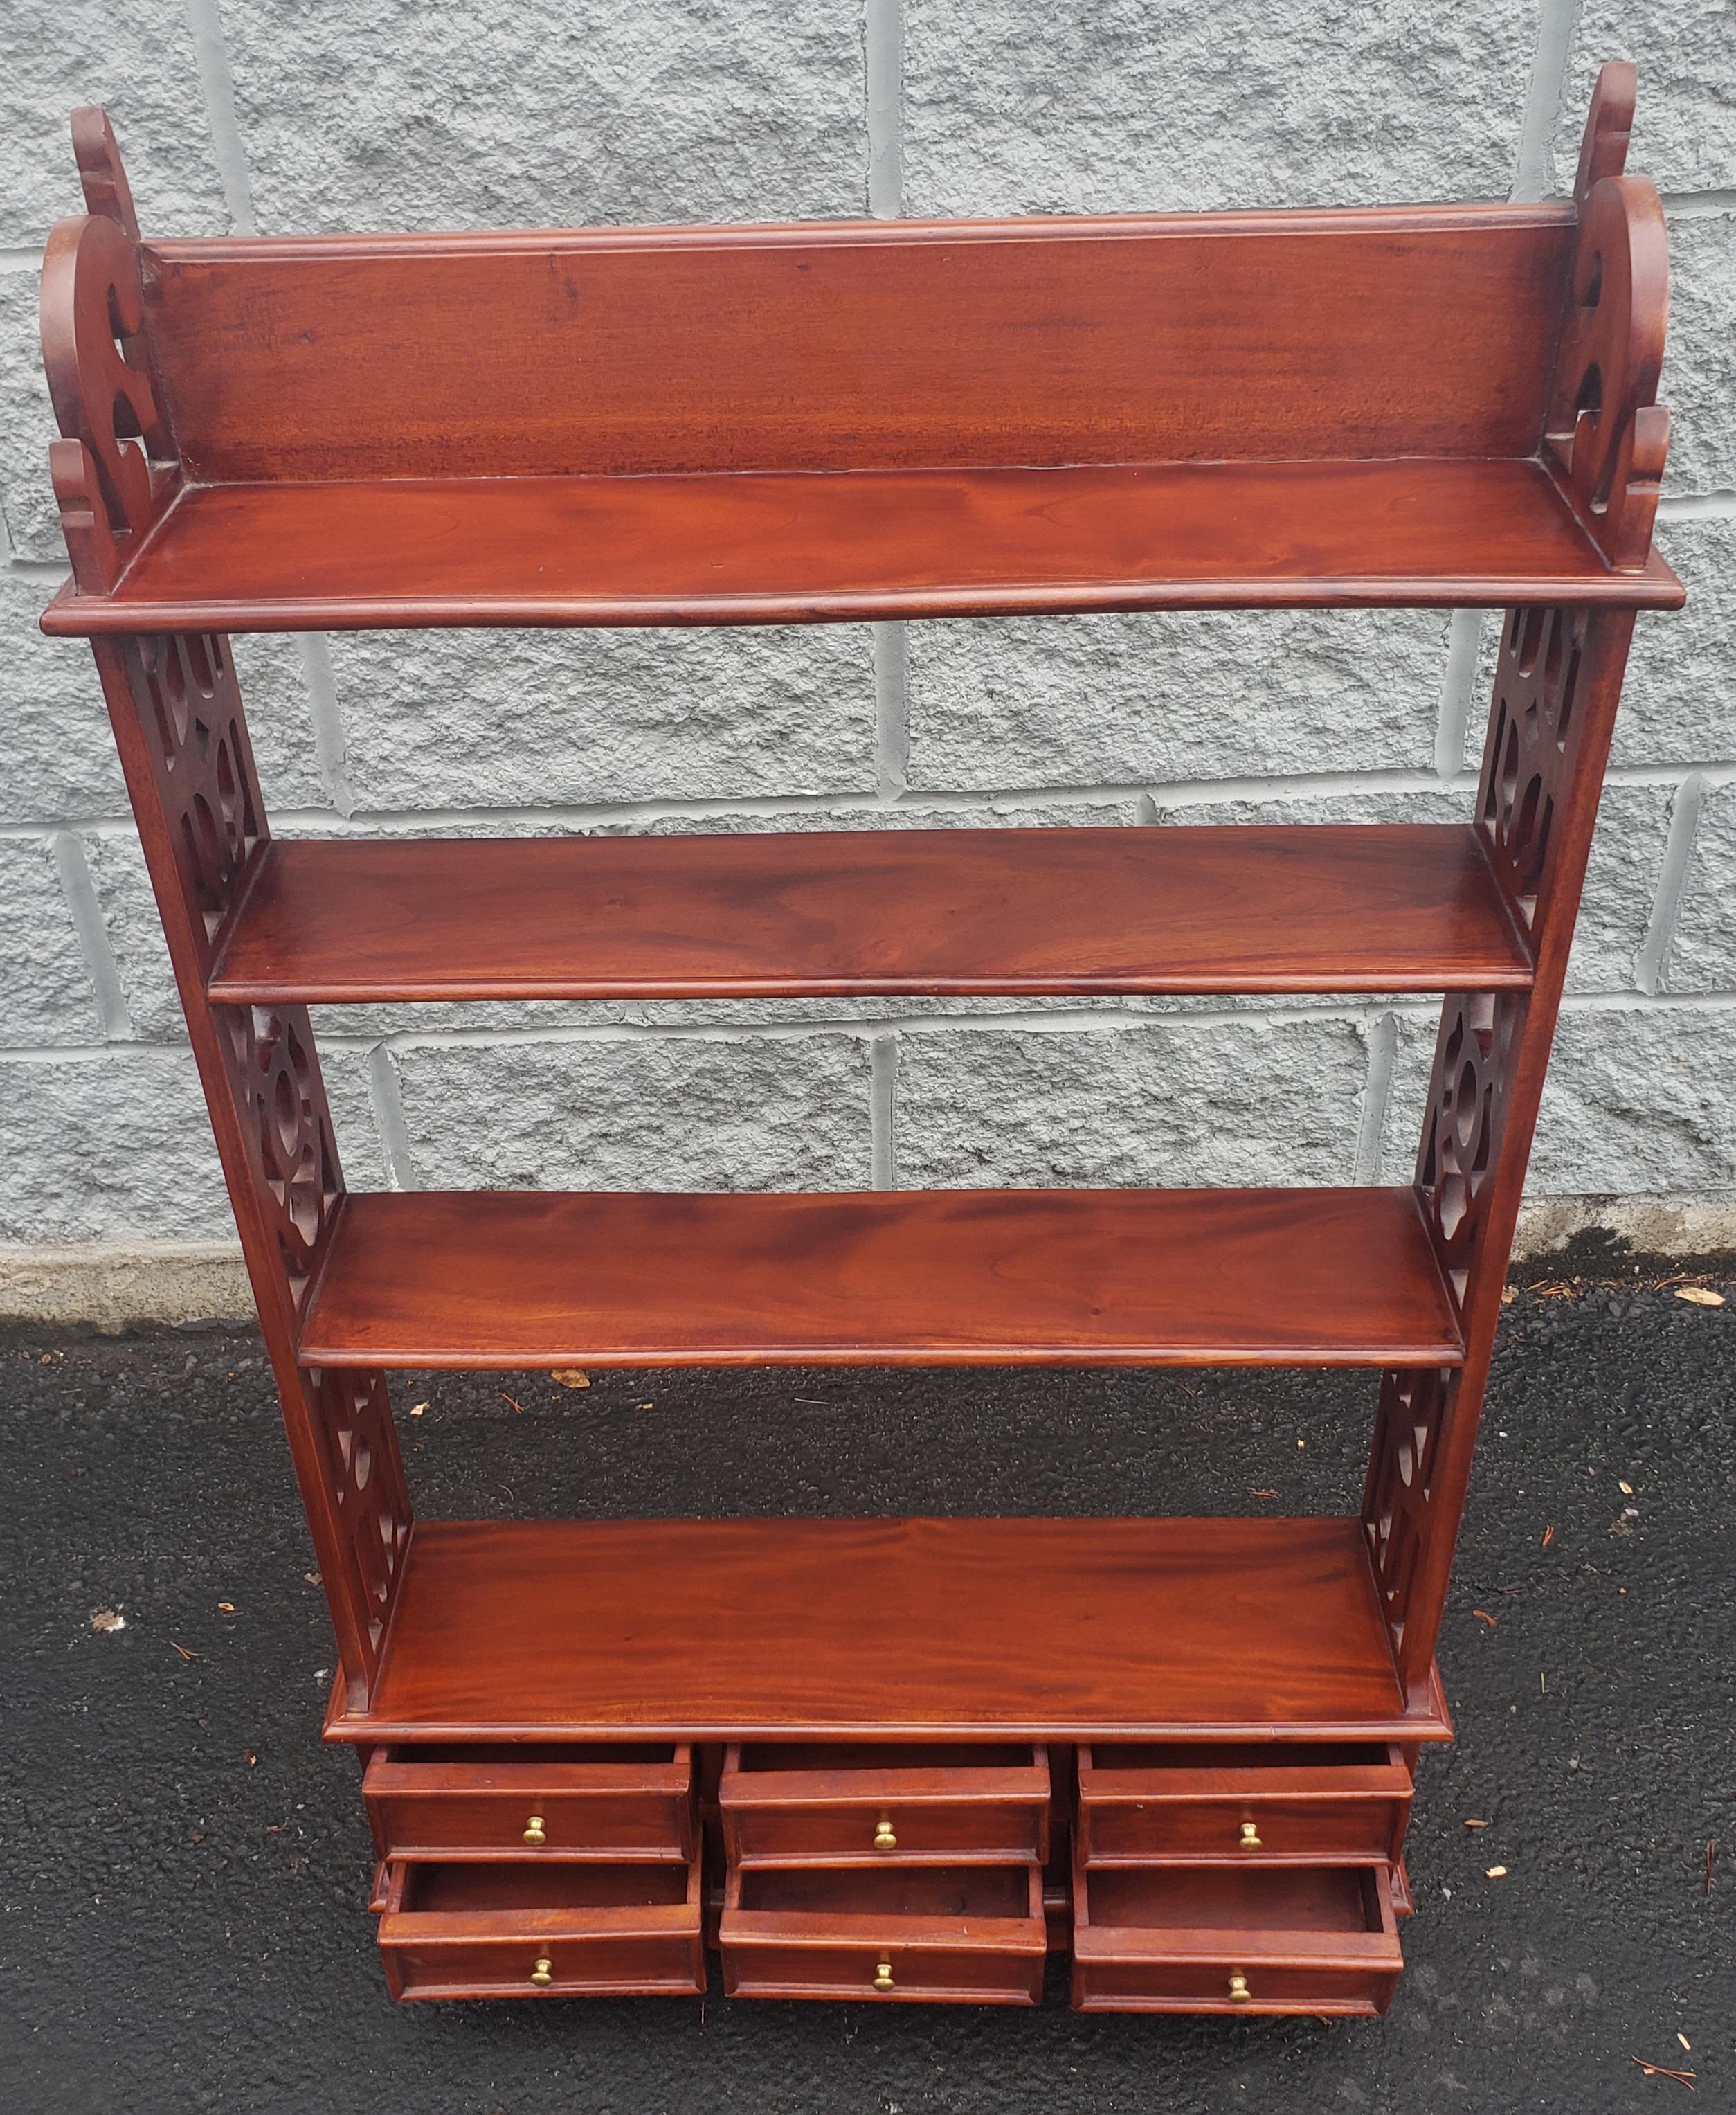 Chippendale Solid Cherry 6-Drawer 4-Tier Free Standing or Wall Hanging Shelves In Good Condition For Sale In Germantown, MD